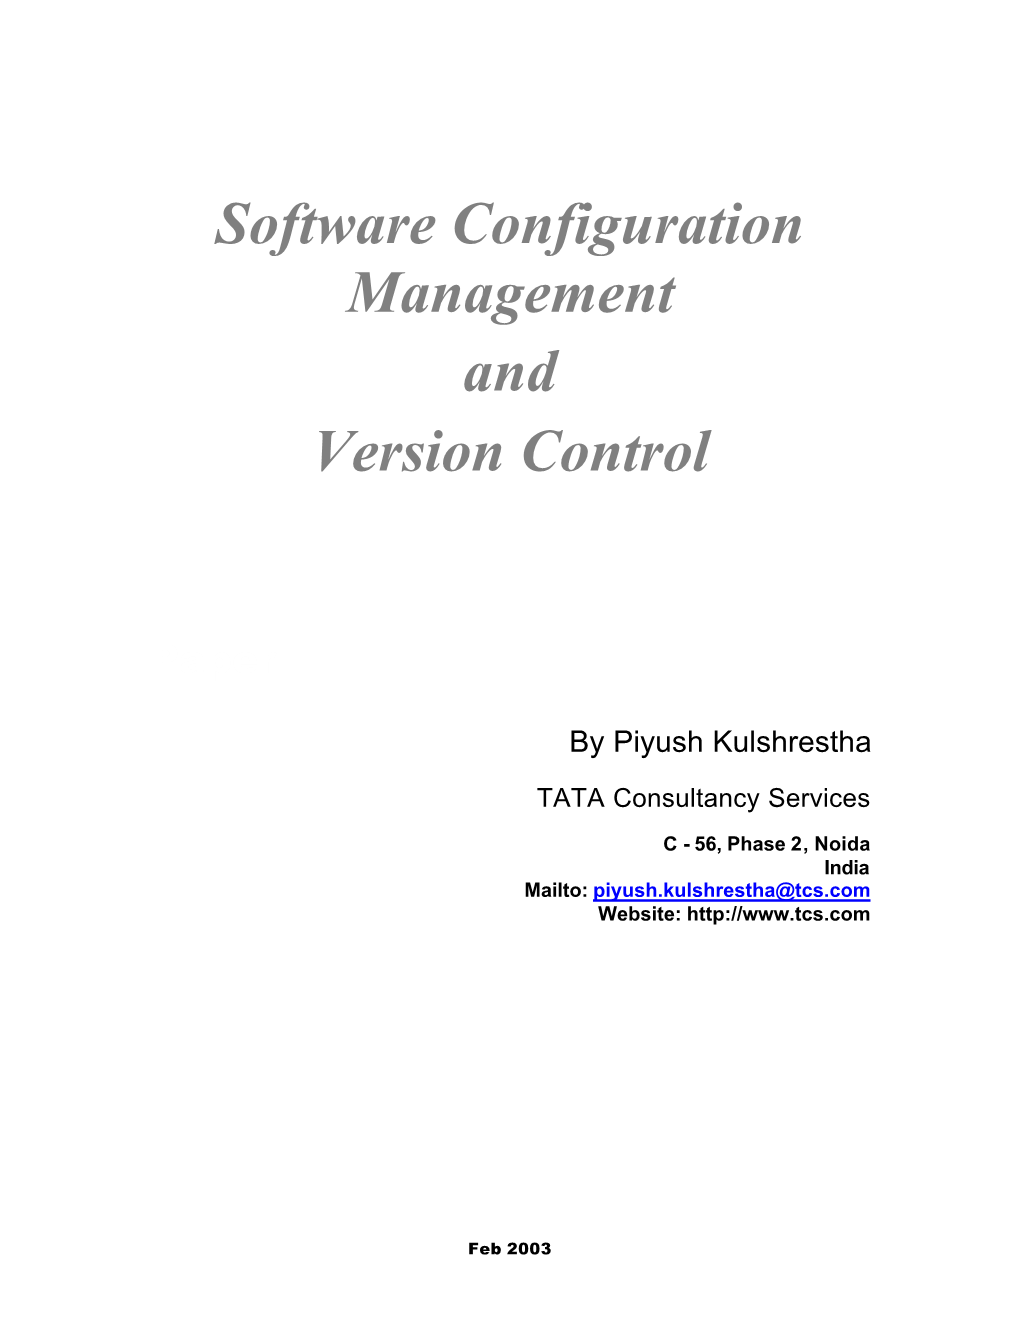 Software Configuration Management and Version Control